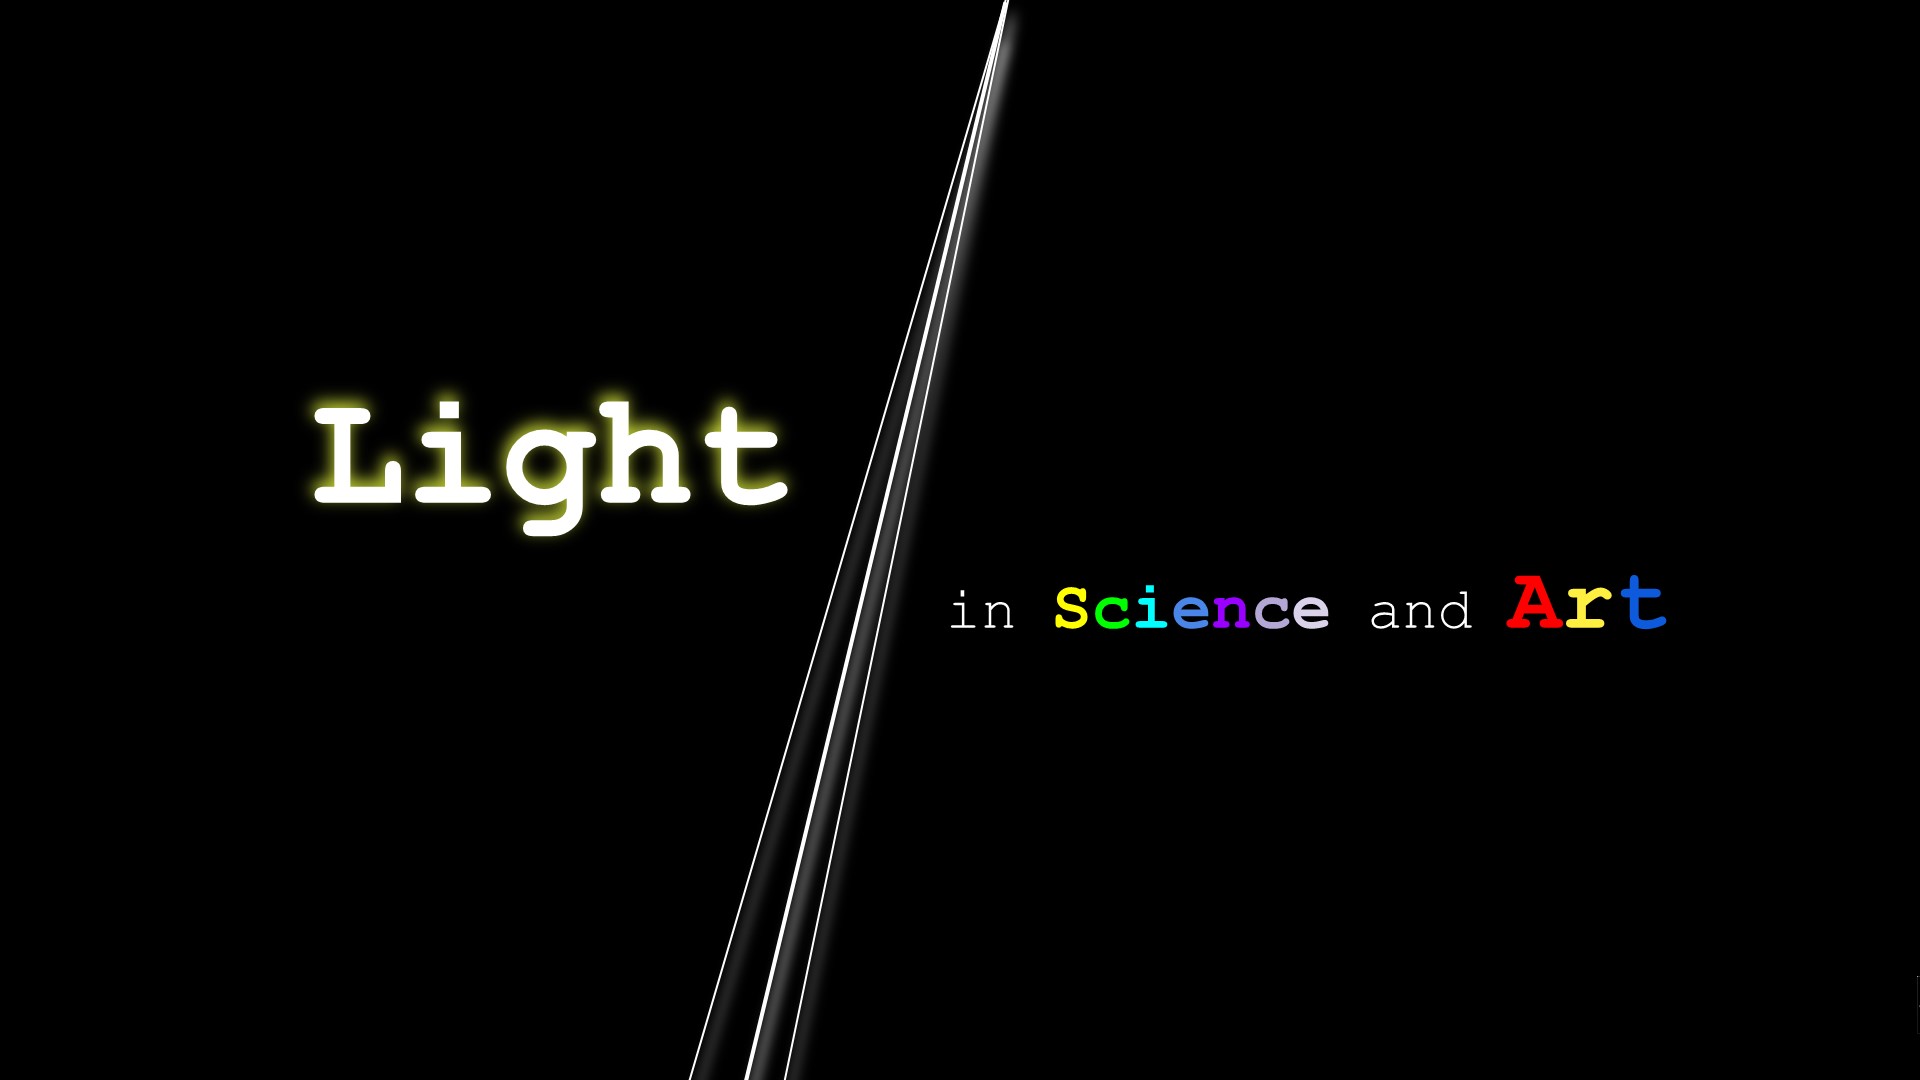 A ray of light and the words Light in Science and Art